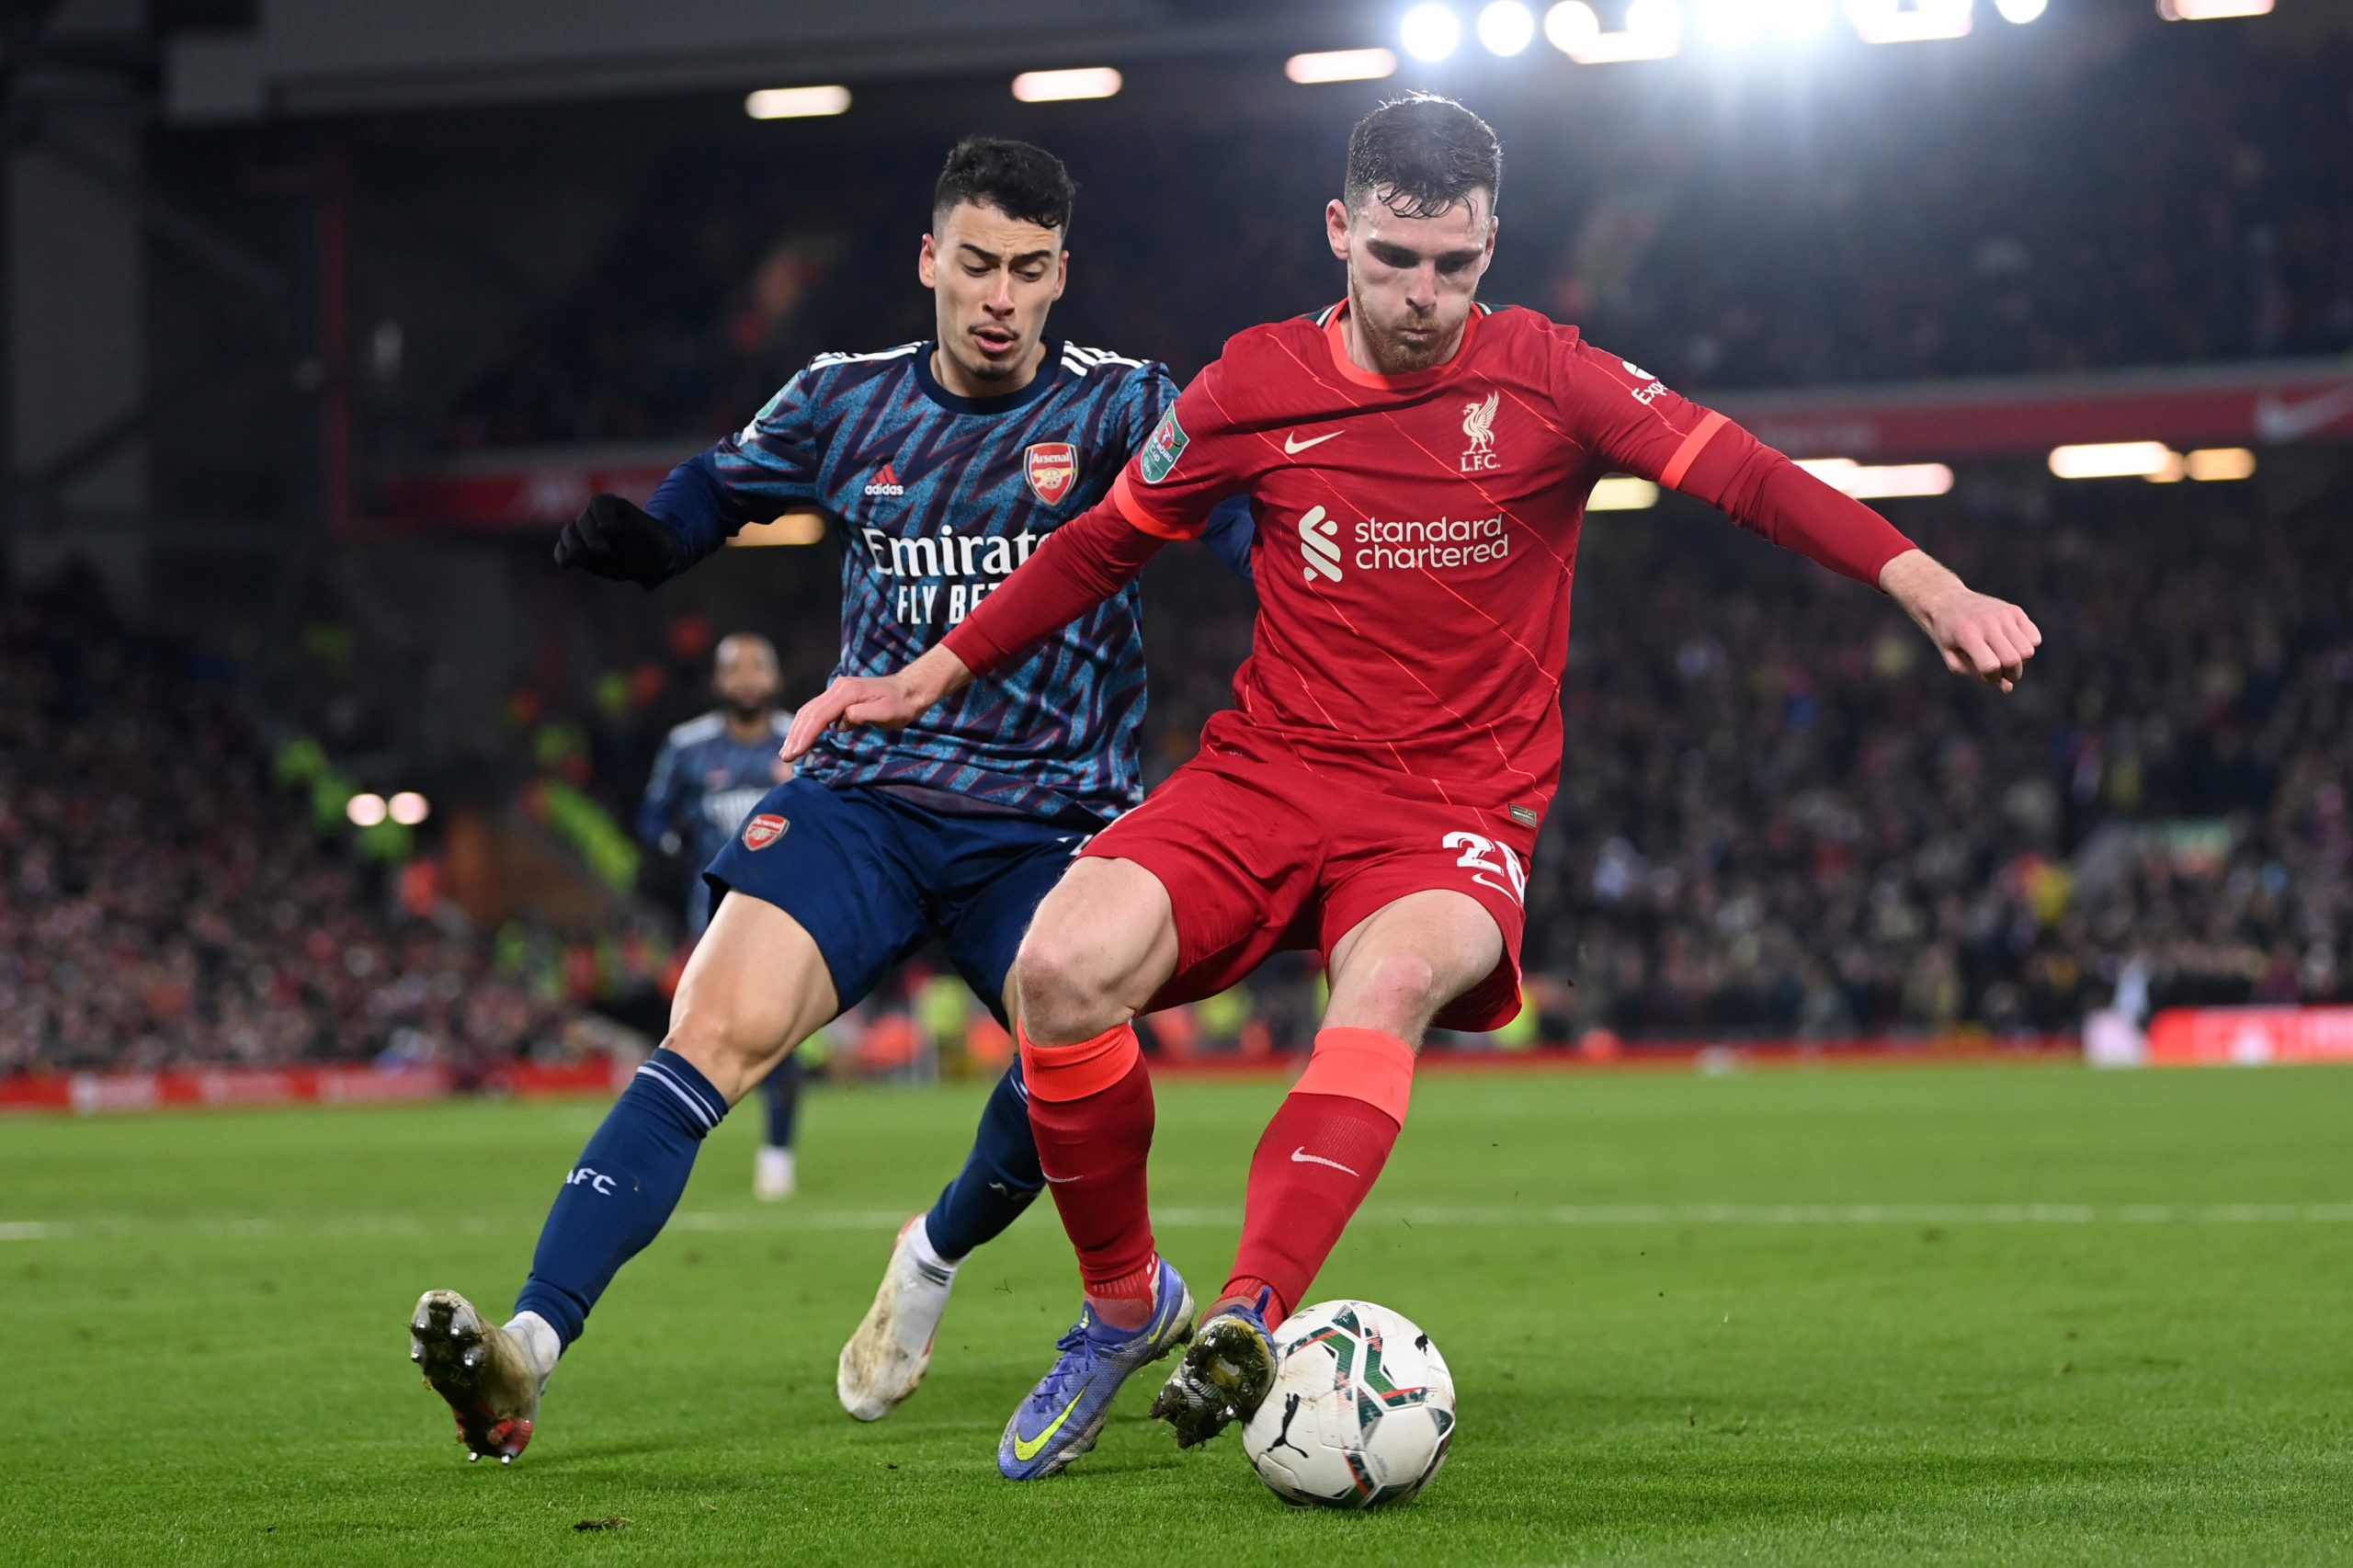 LIVERPOOL, ENGLAND - JANUARY 13: Andrew Robertson of Liverpool holds the ball up from Gabriel Martinelli of Arsenal during the Carabao Cup Semi Final First Leg match between Liverpool and Arsenal at Anfield on January 13, 2022 in Liverpool, England. (Photo by Michael Regan/Getty Images)The 4th Official uses images provided by the following image agency:
Getty Images (https://www.gettyimages.de/)
Imago Images (https://www.imago-images.de/)